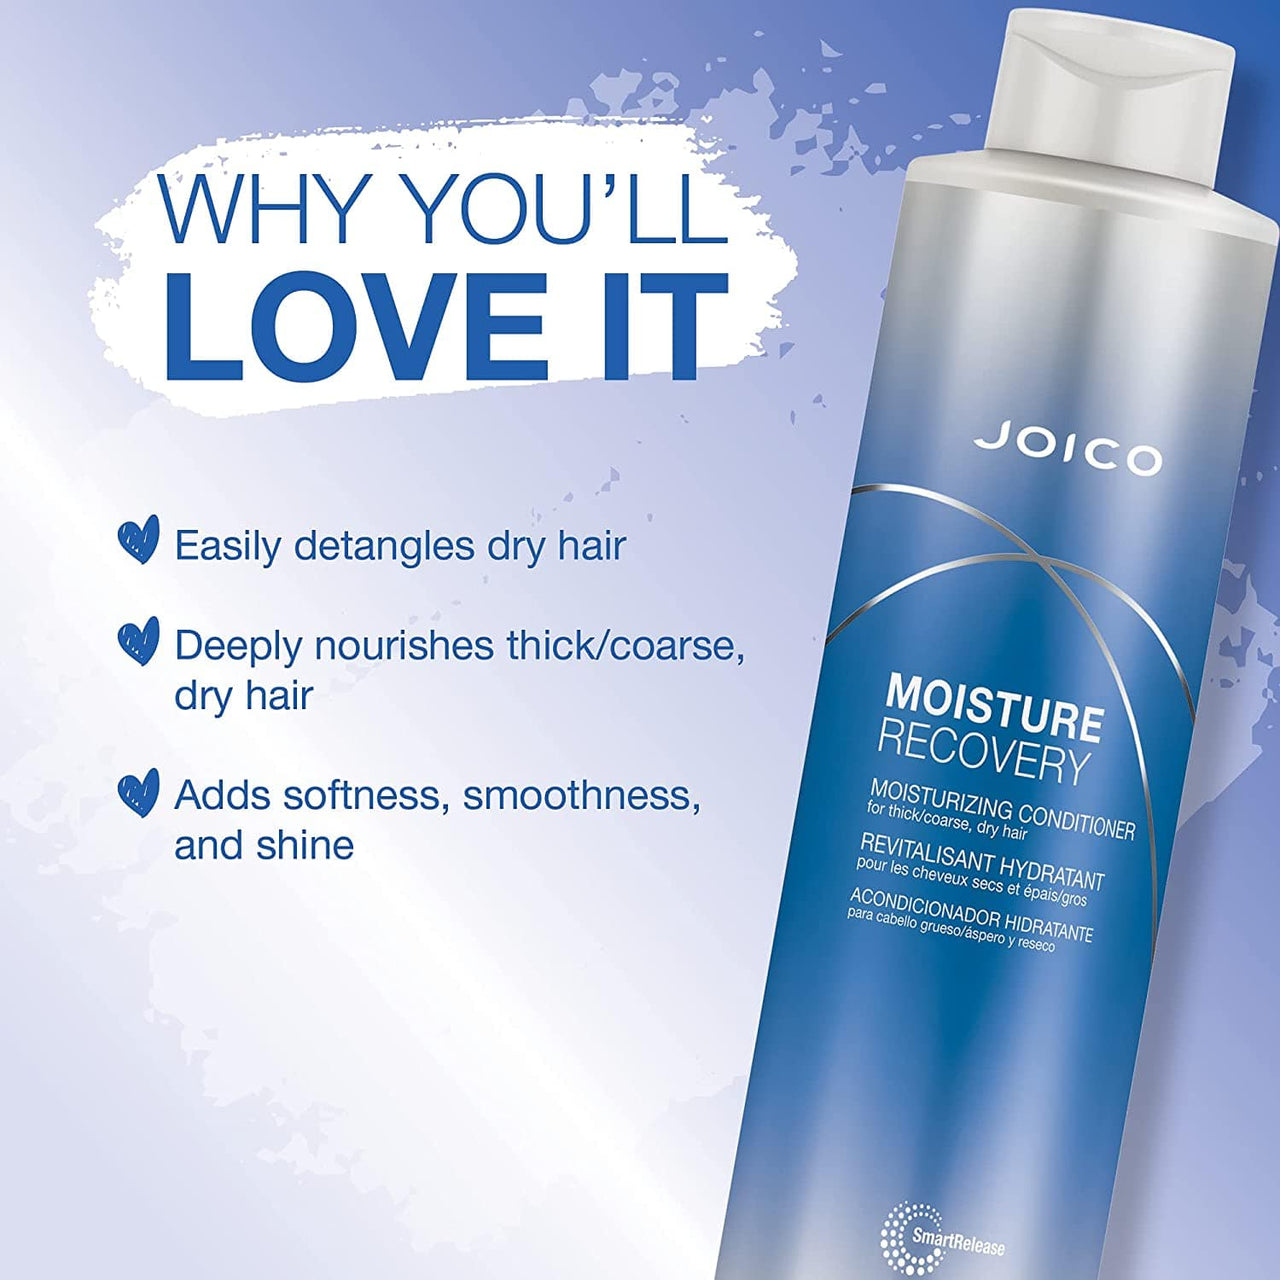 JOICO_Moisture Recovery moisturizing conditioner for thick/coarse, dry hair_Cosmetic World